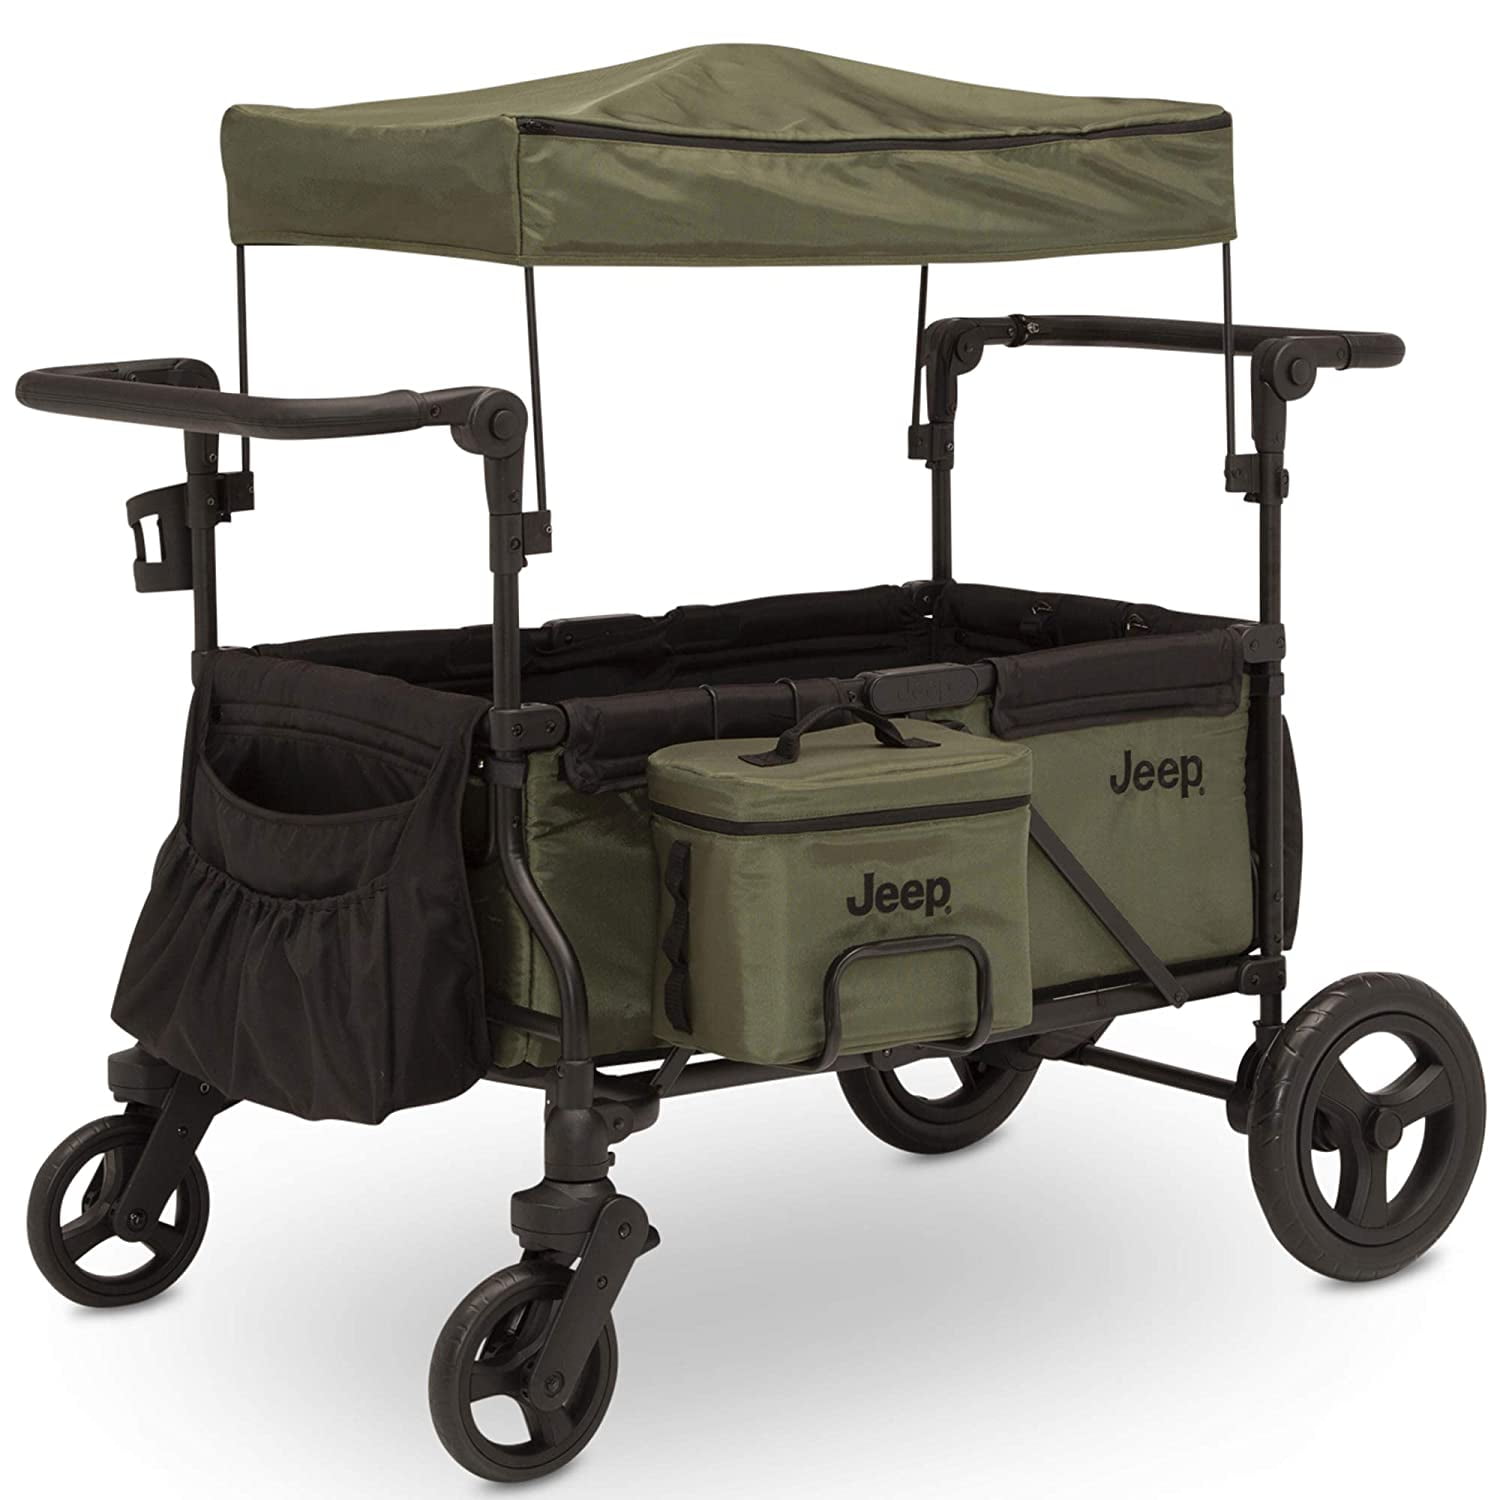 Delta Children Jeep Deluxe Wrangler Wagon Stroller with Cooler Bag and Parent Organizer